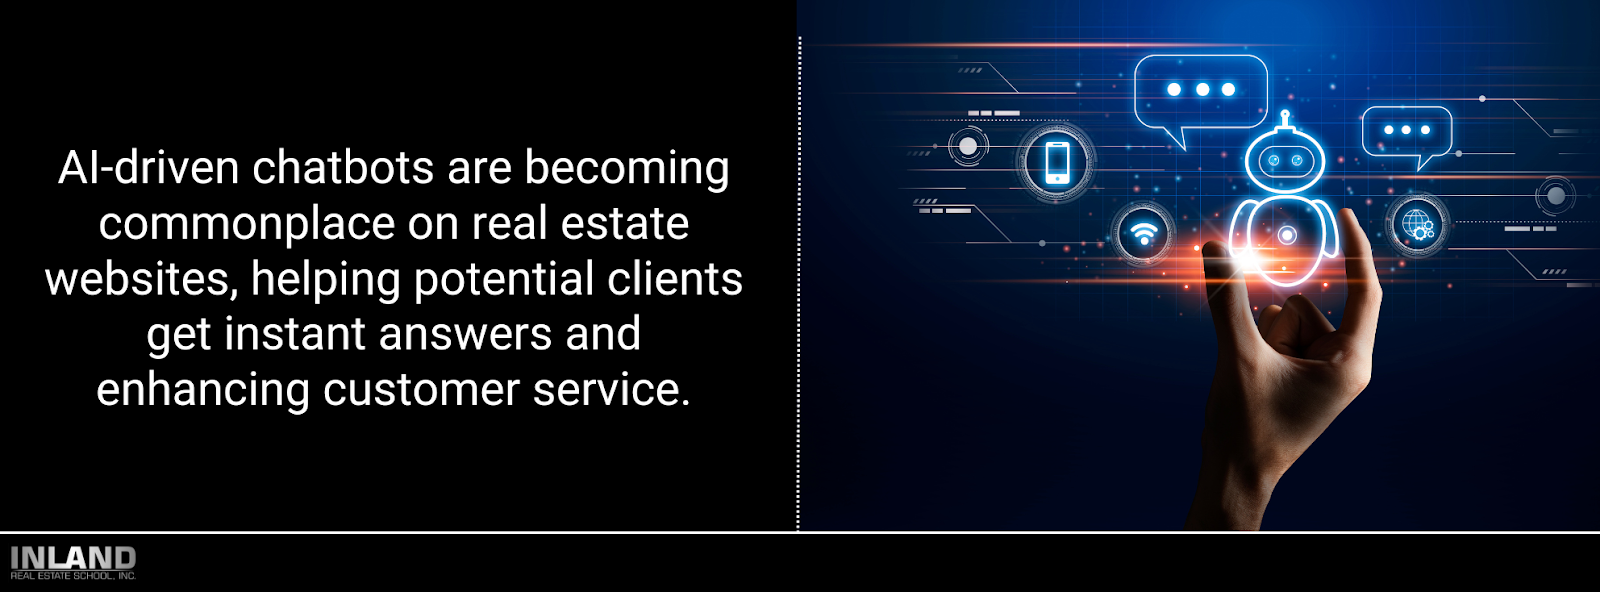 AI-powered chatbot providing real estate services